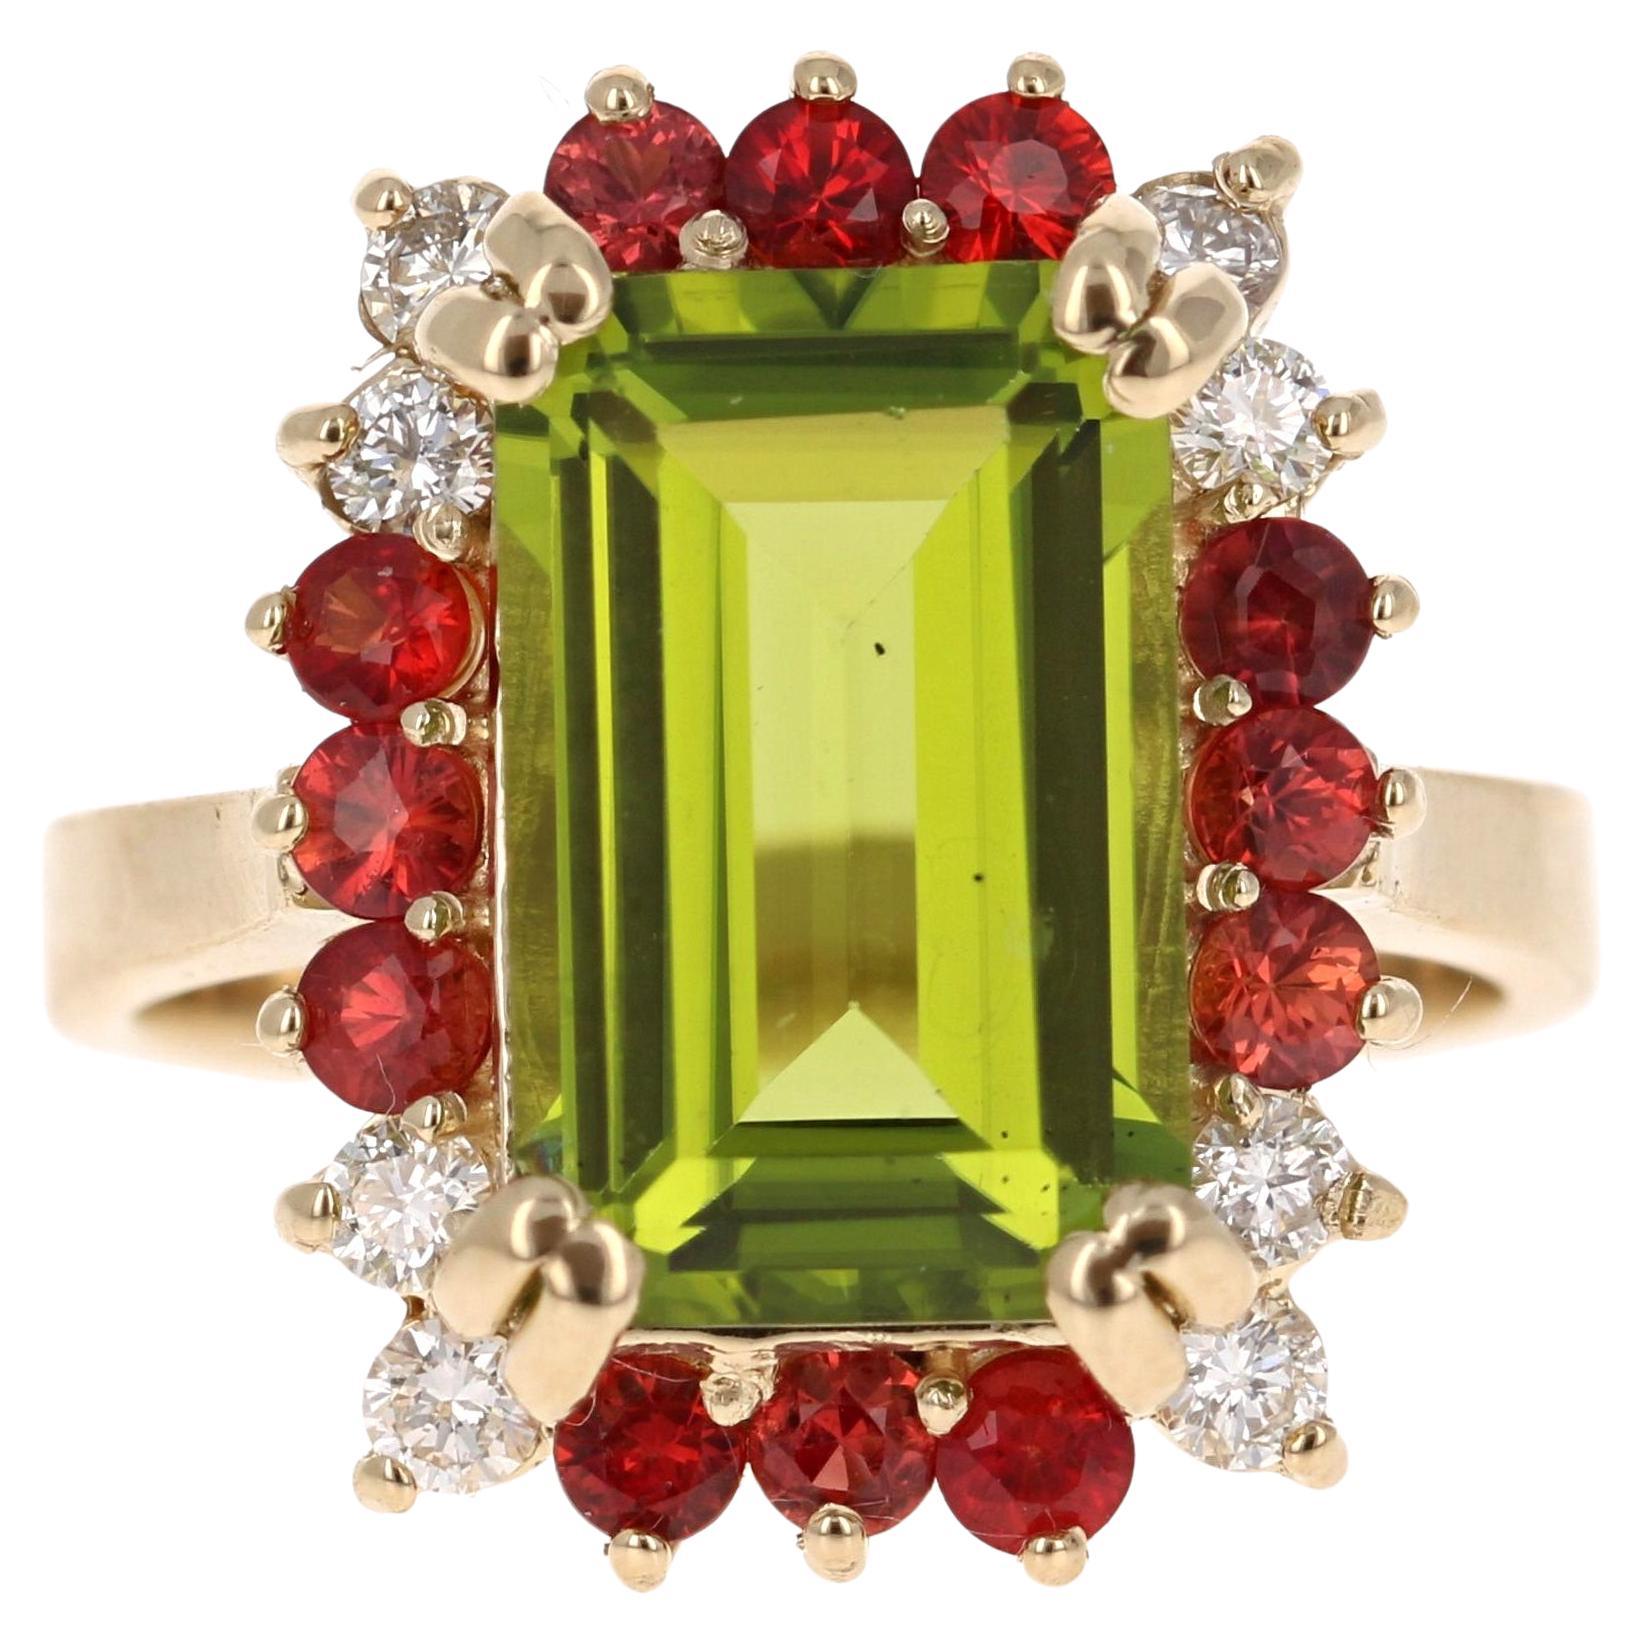 6.67 Carat Emerald Cut Peridot Sapphire and Diamond 14 Karat Yellow Gold Ring -  the perfect ring for the holidays!!  The red and green stones are so festive for the upcoming season!!

This beautiful ring has an Emerald Cut Peridot that weighs 5.32